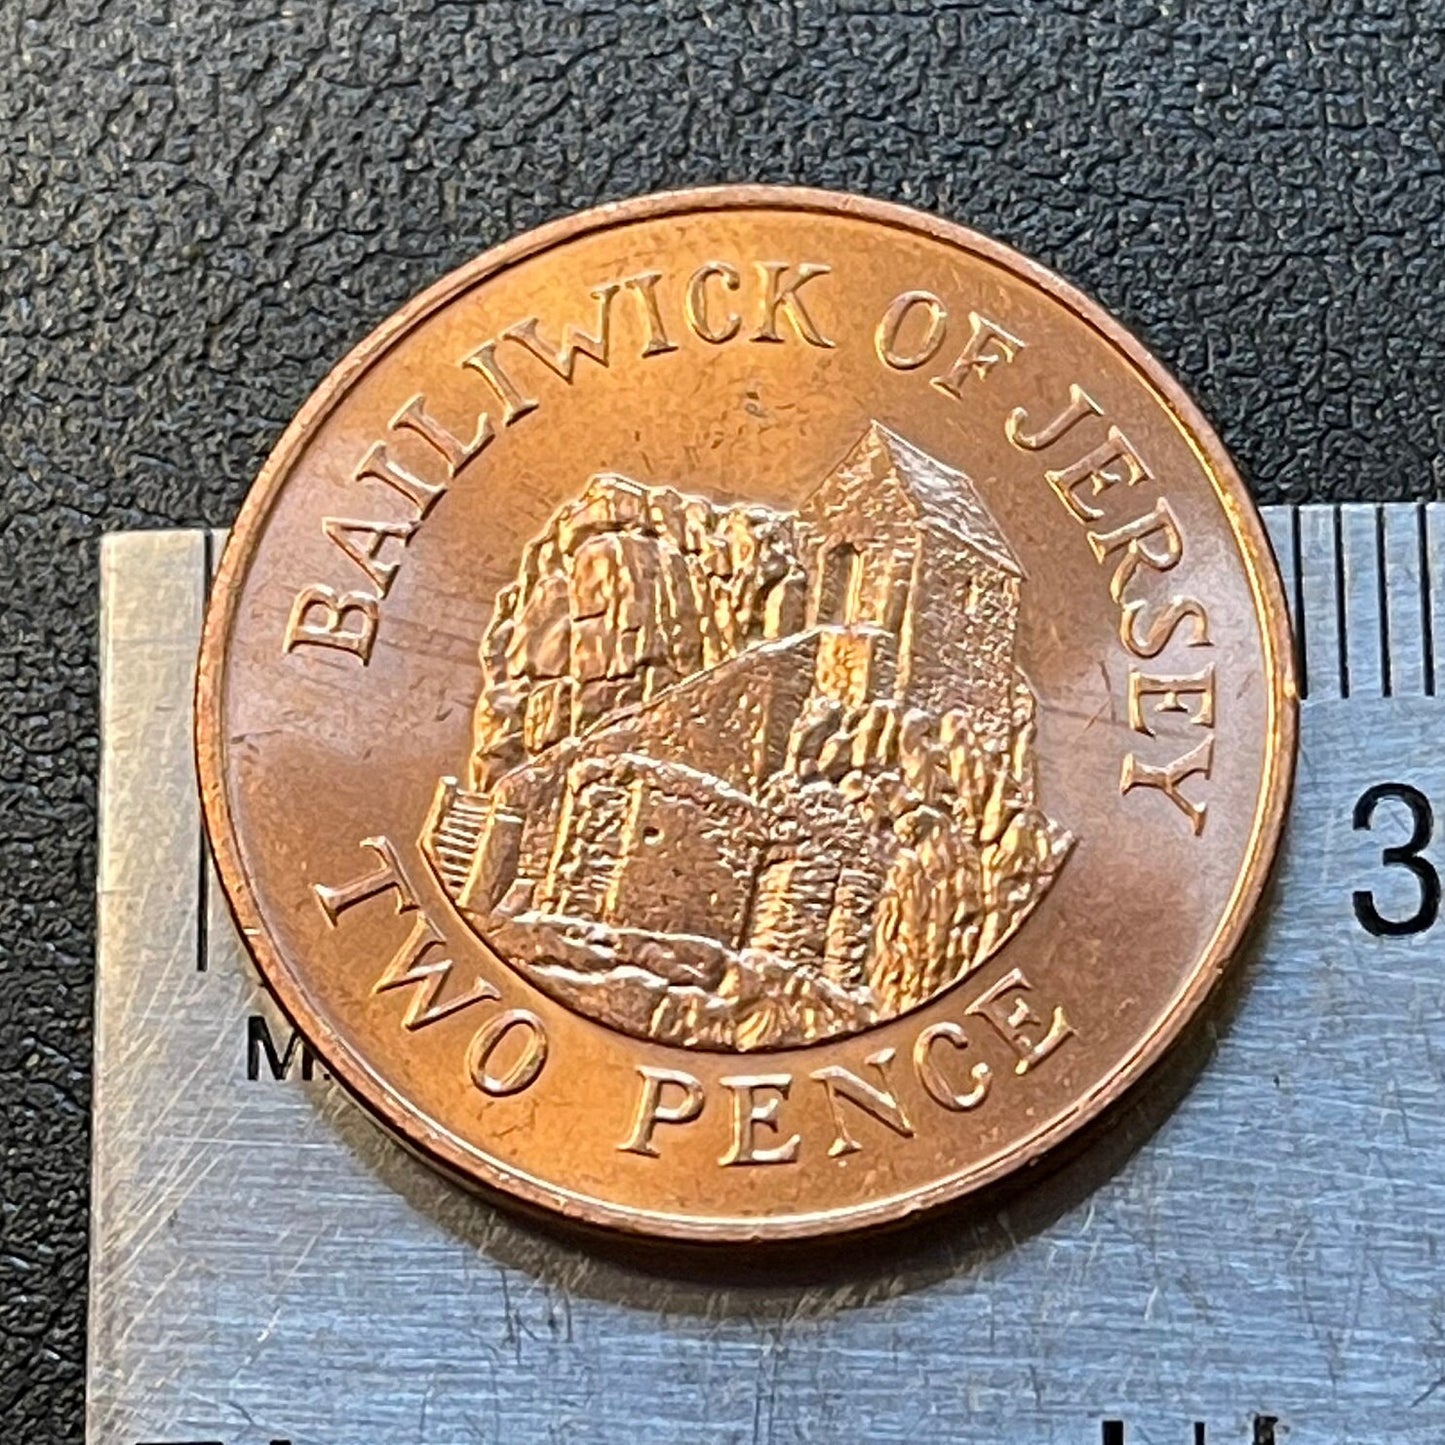 Hermitage of St Helier 2 Pence Jersey Authentic Coin Money for Jewelry and Craft Making (Bailiwick of Jersey)